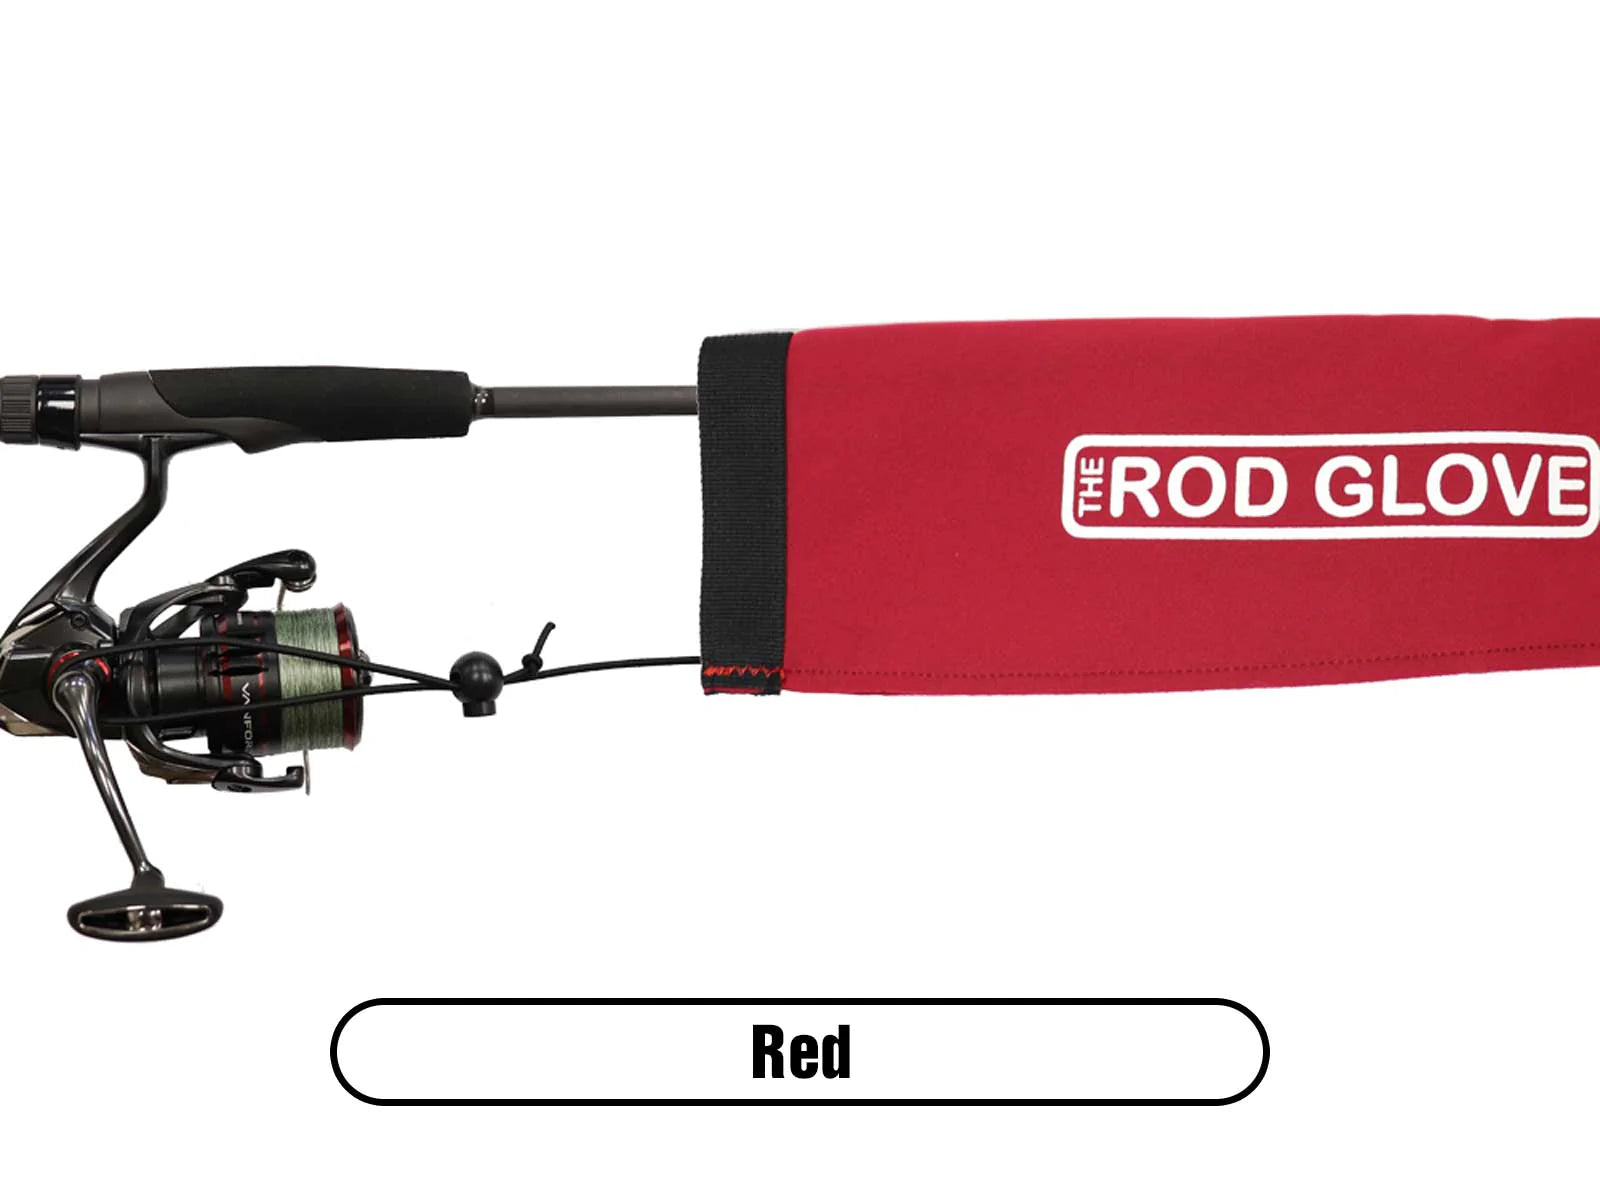 https://cdn.shopify.com/s/files/1/0606/8692/6048/products/Tournament-Series-spinning-Rod-Glove-Red.webp?v=1680662006&width=1600